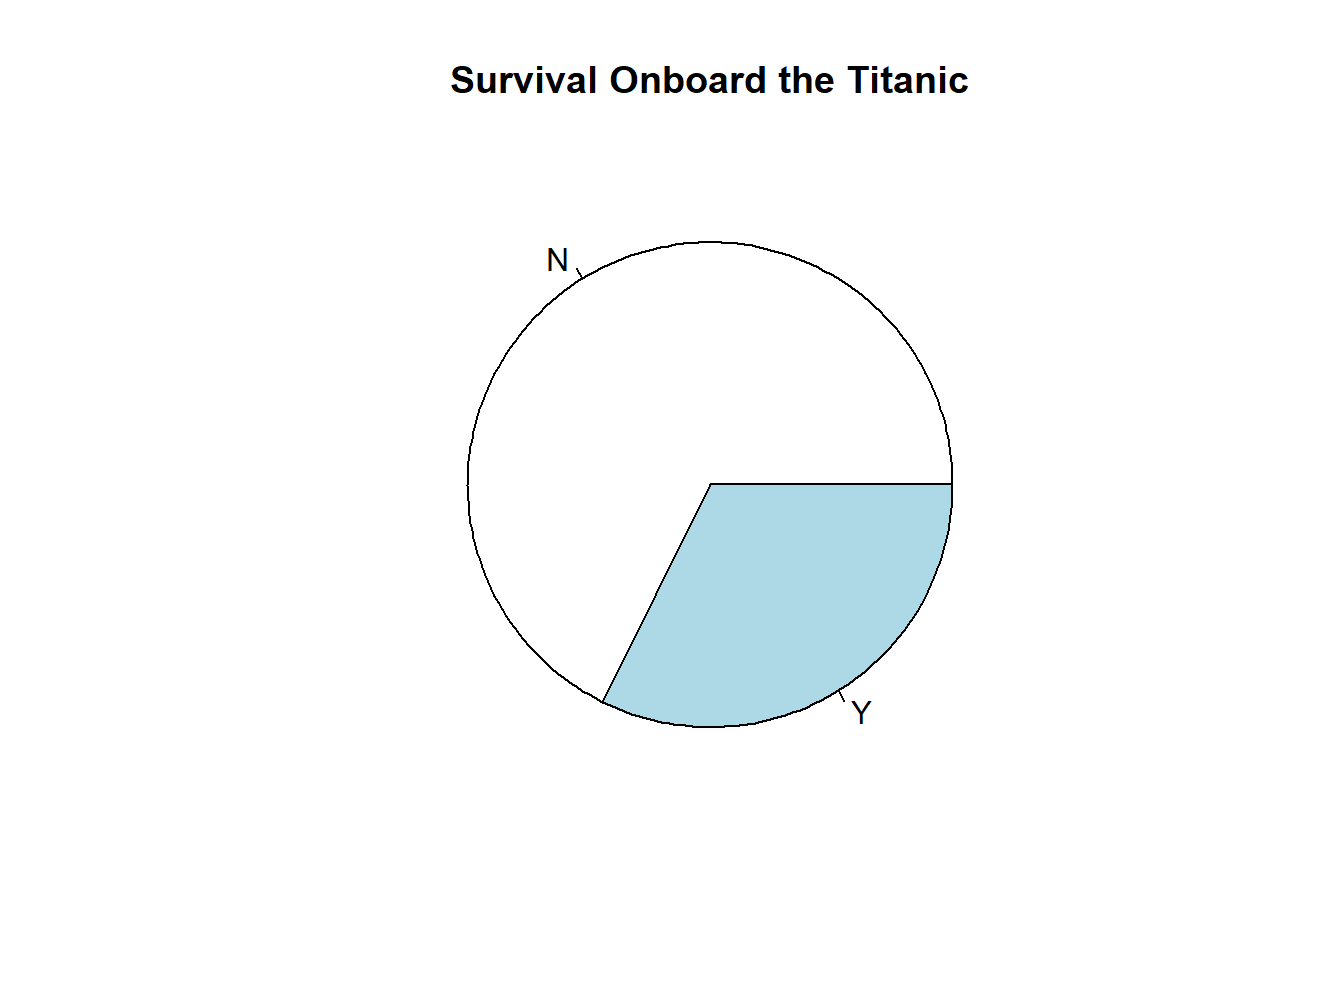 A Titled Pie Chart